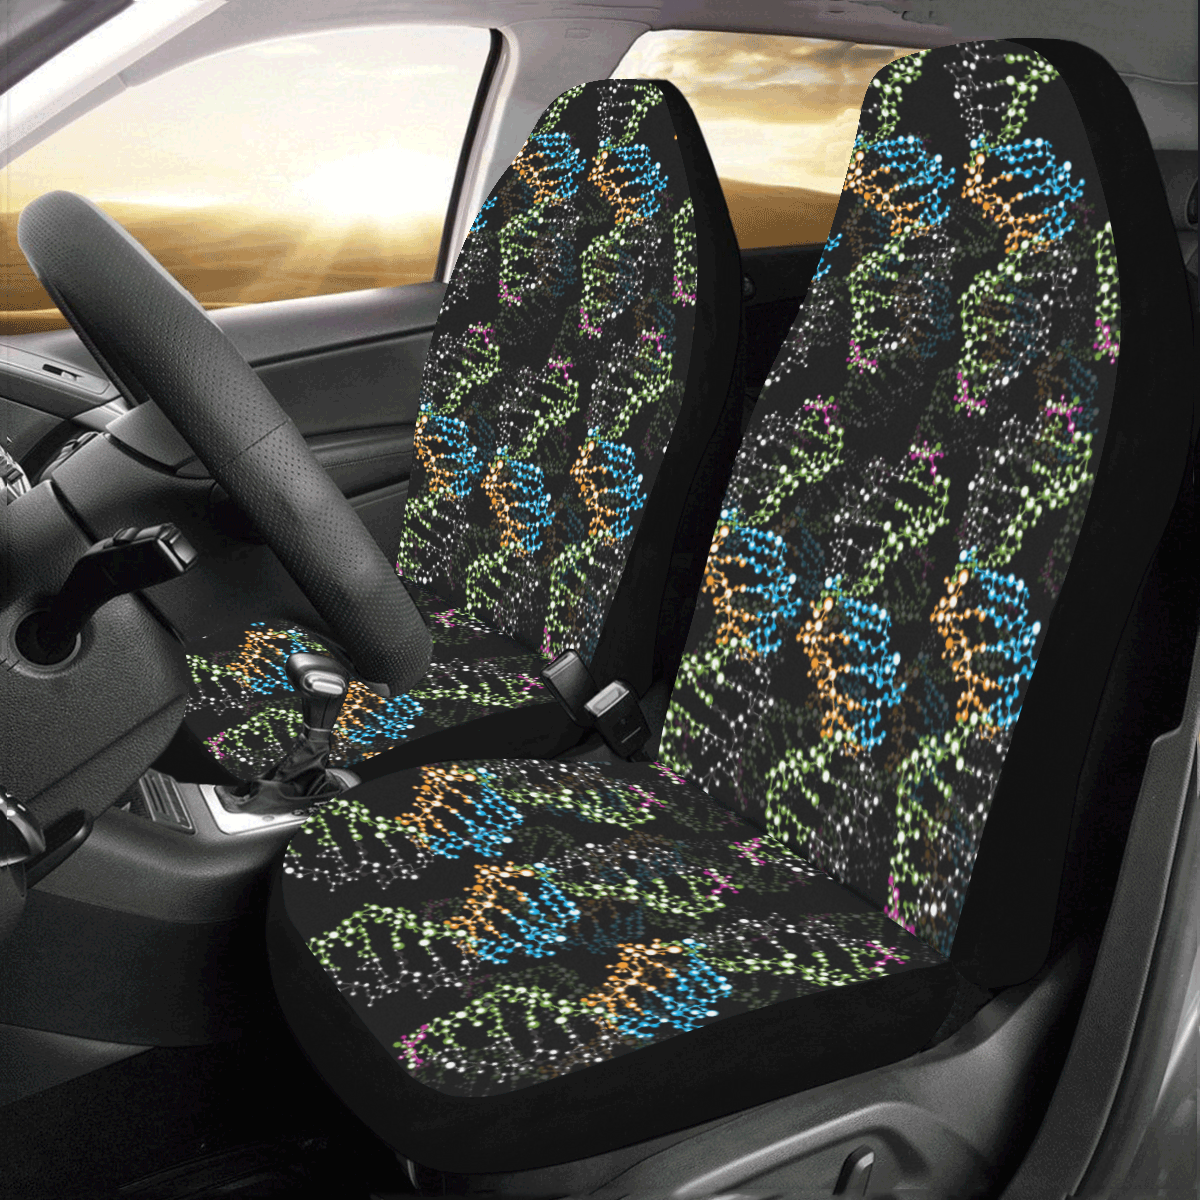 DNA pattern - Biology - Scientist Car Seat Covers (Set of 2)